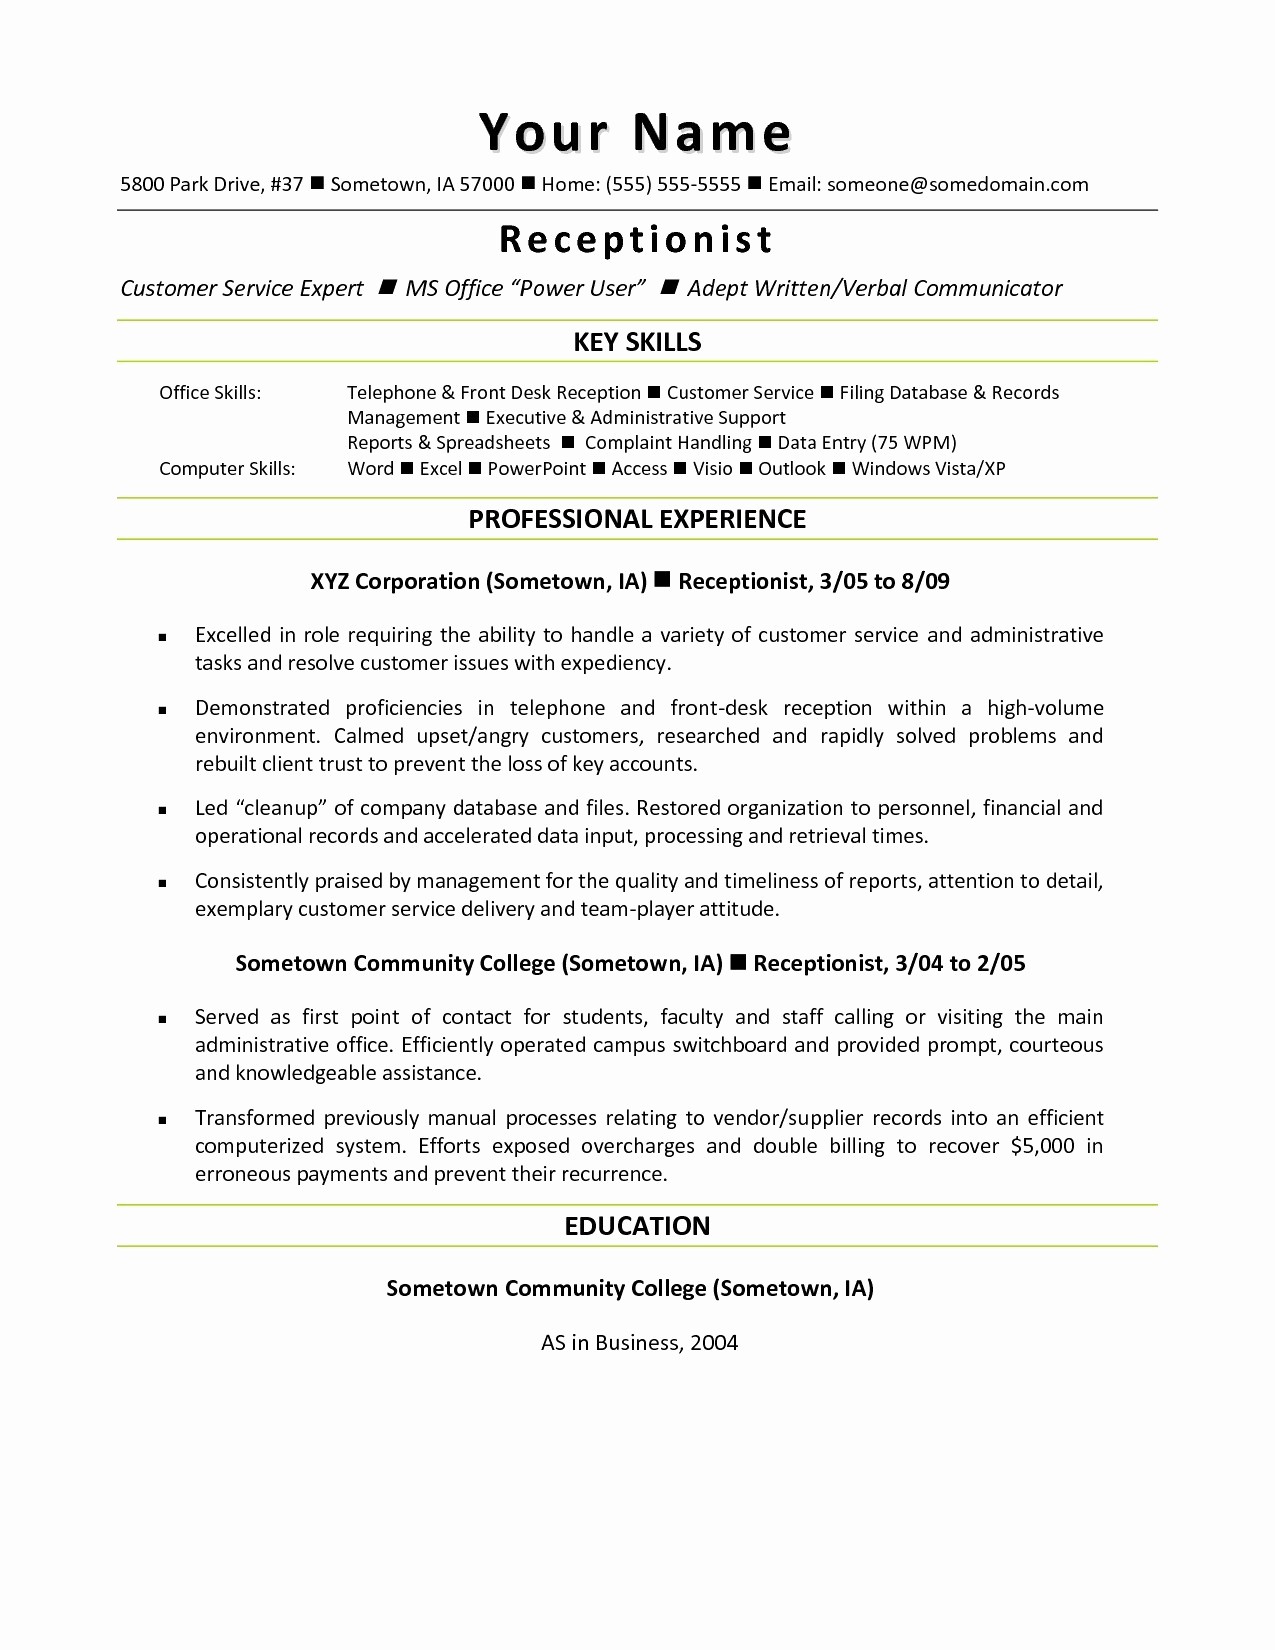 Letter Of Recommendation Word Template Elegant Microsoft Word Letter Re Mendation Template Samples